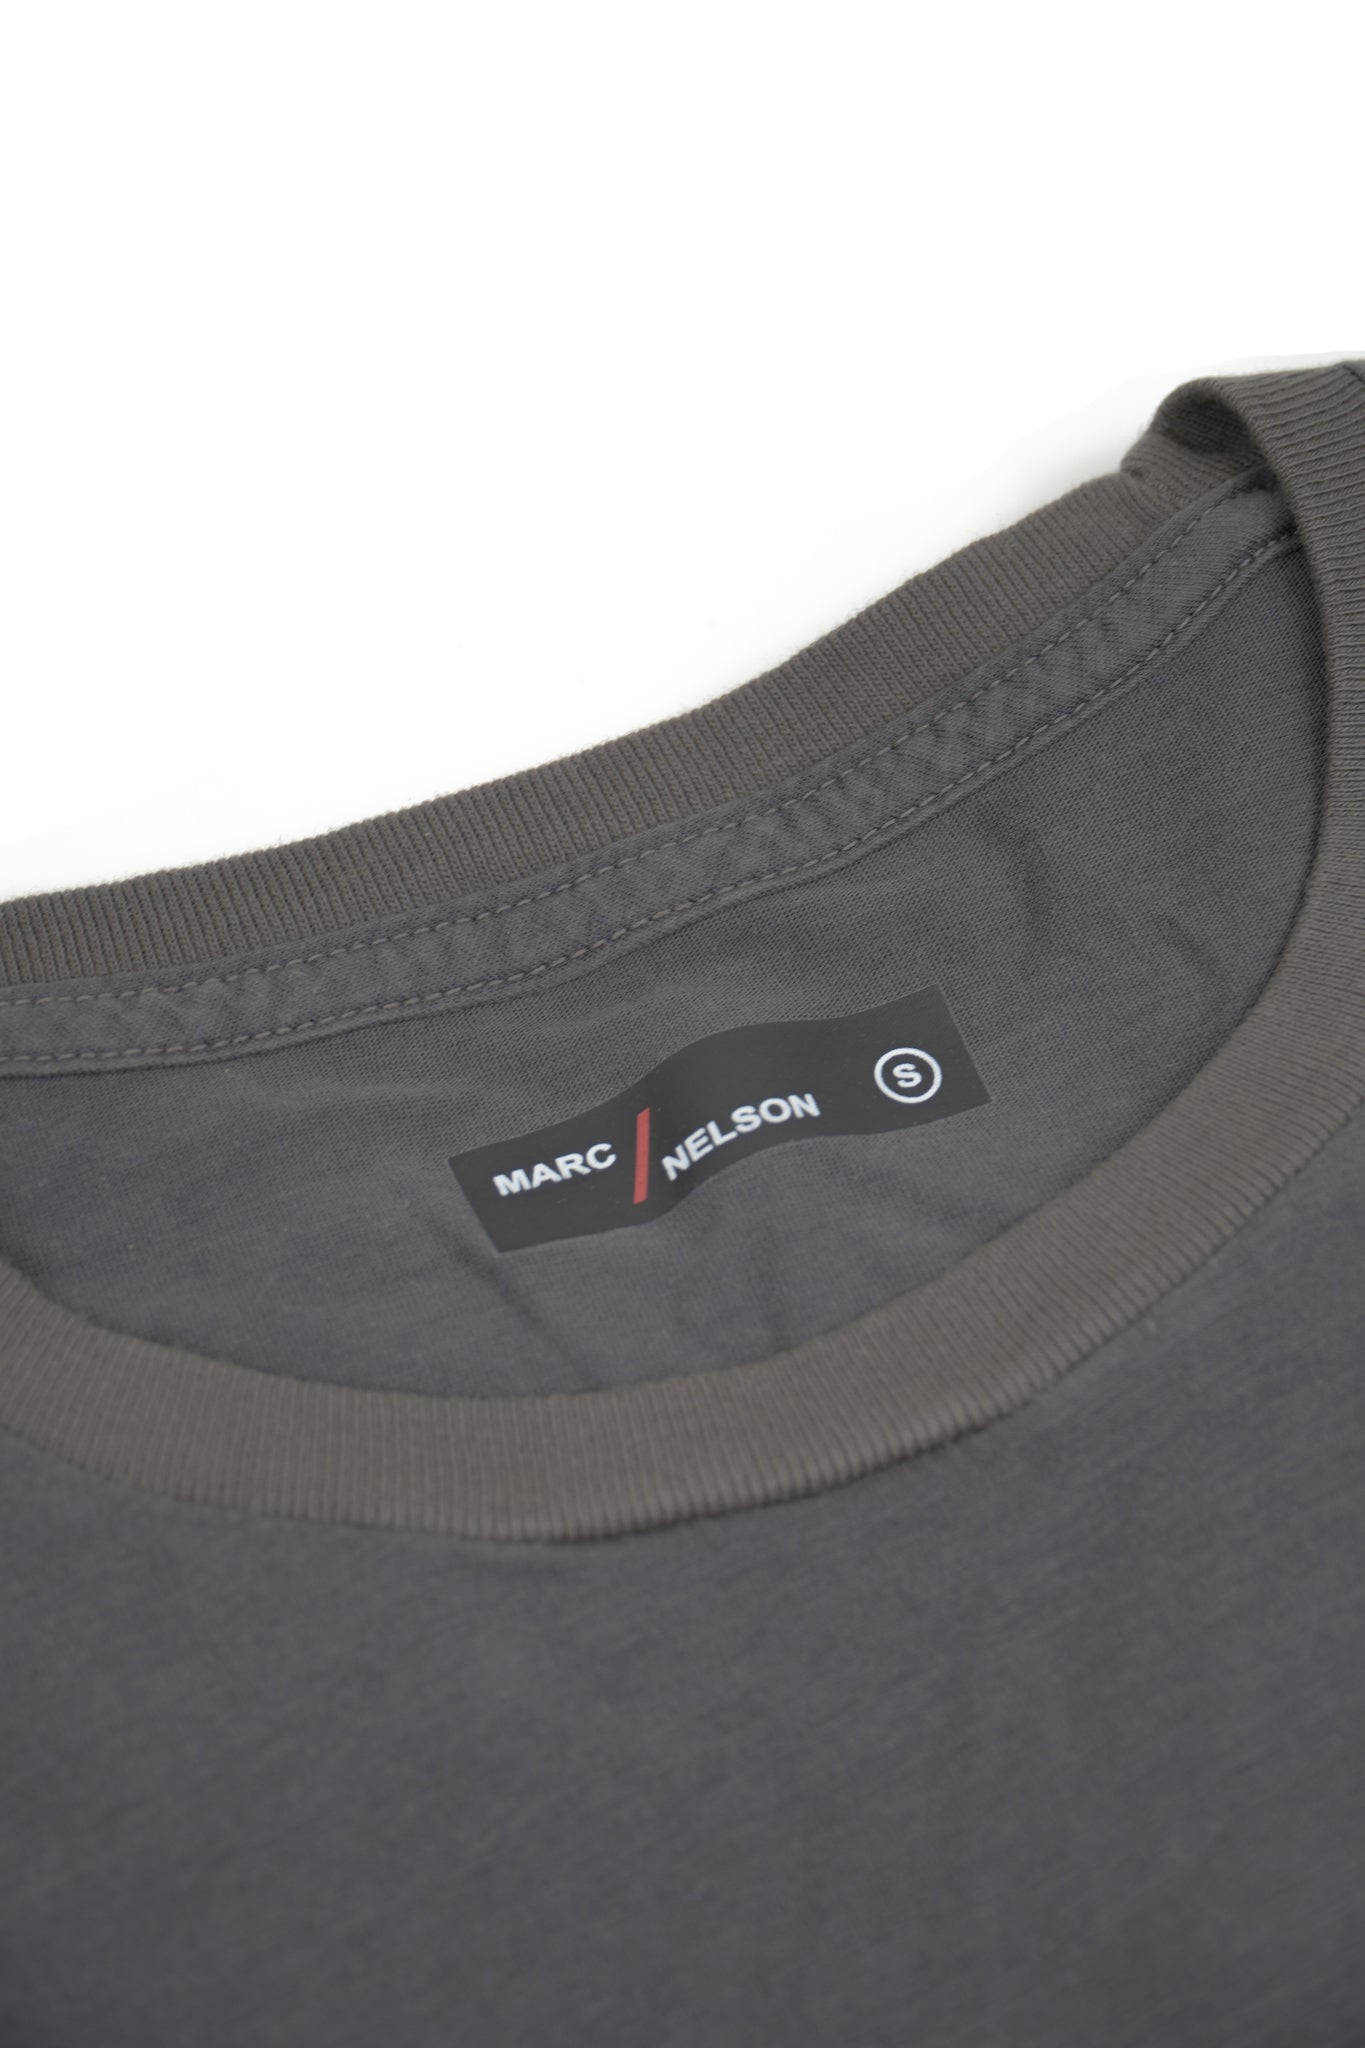 Gray crew neck t-shirt laid out flat on a white background.